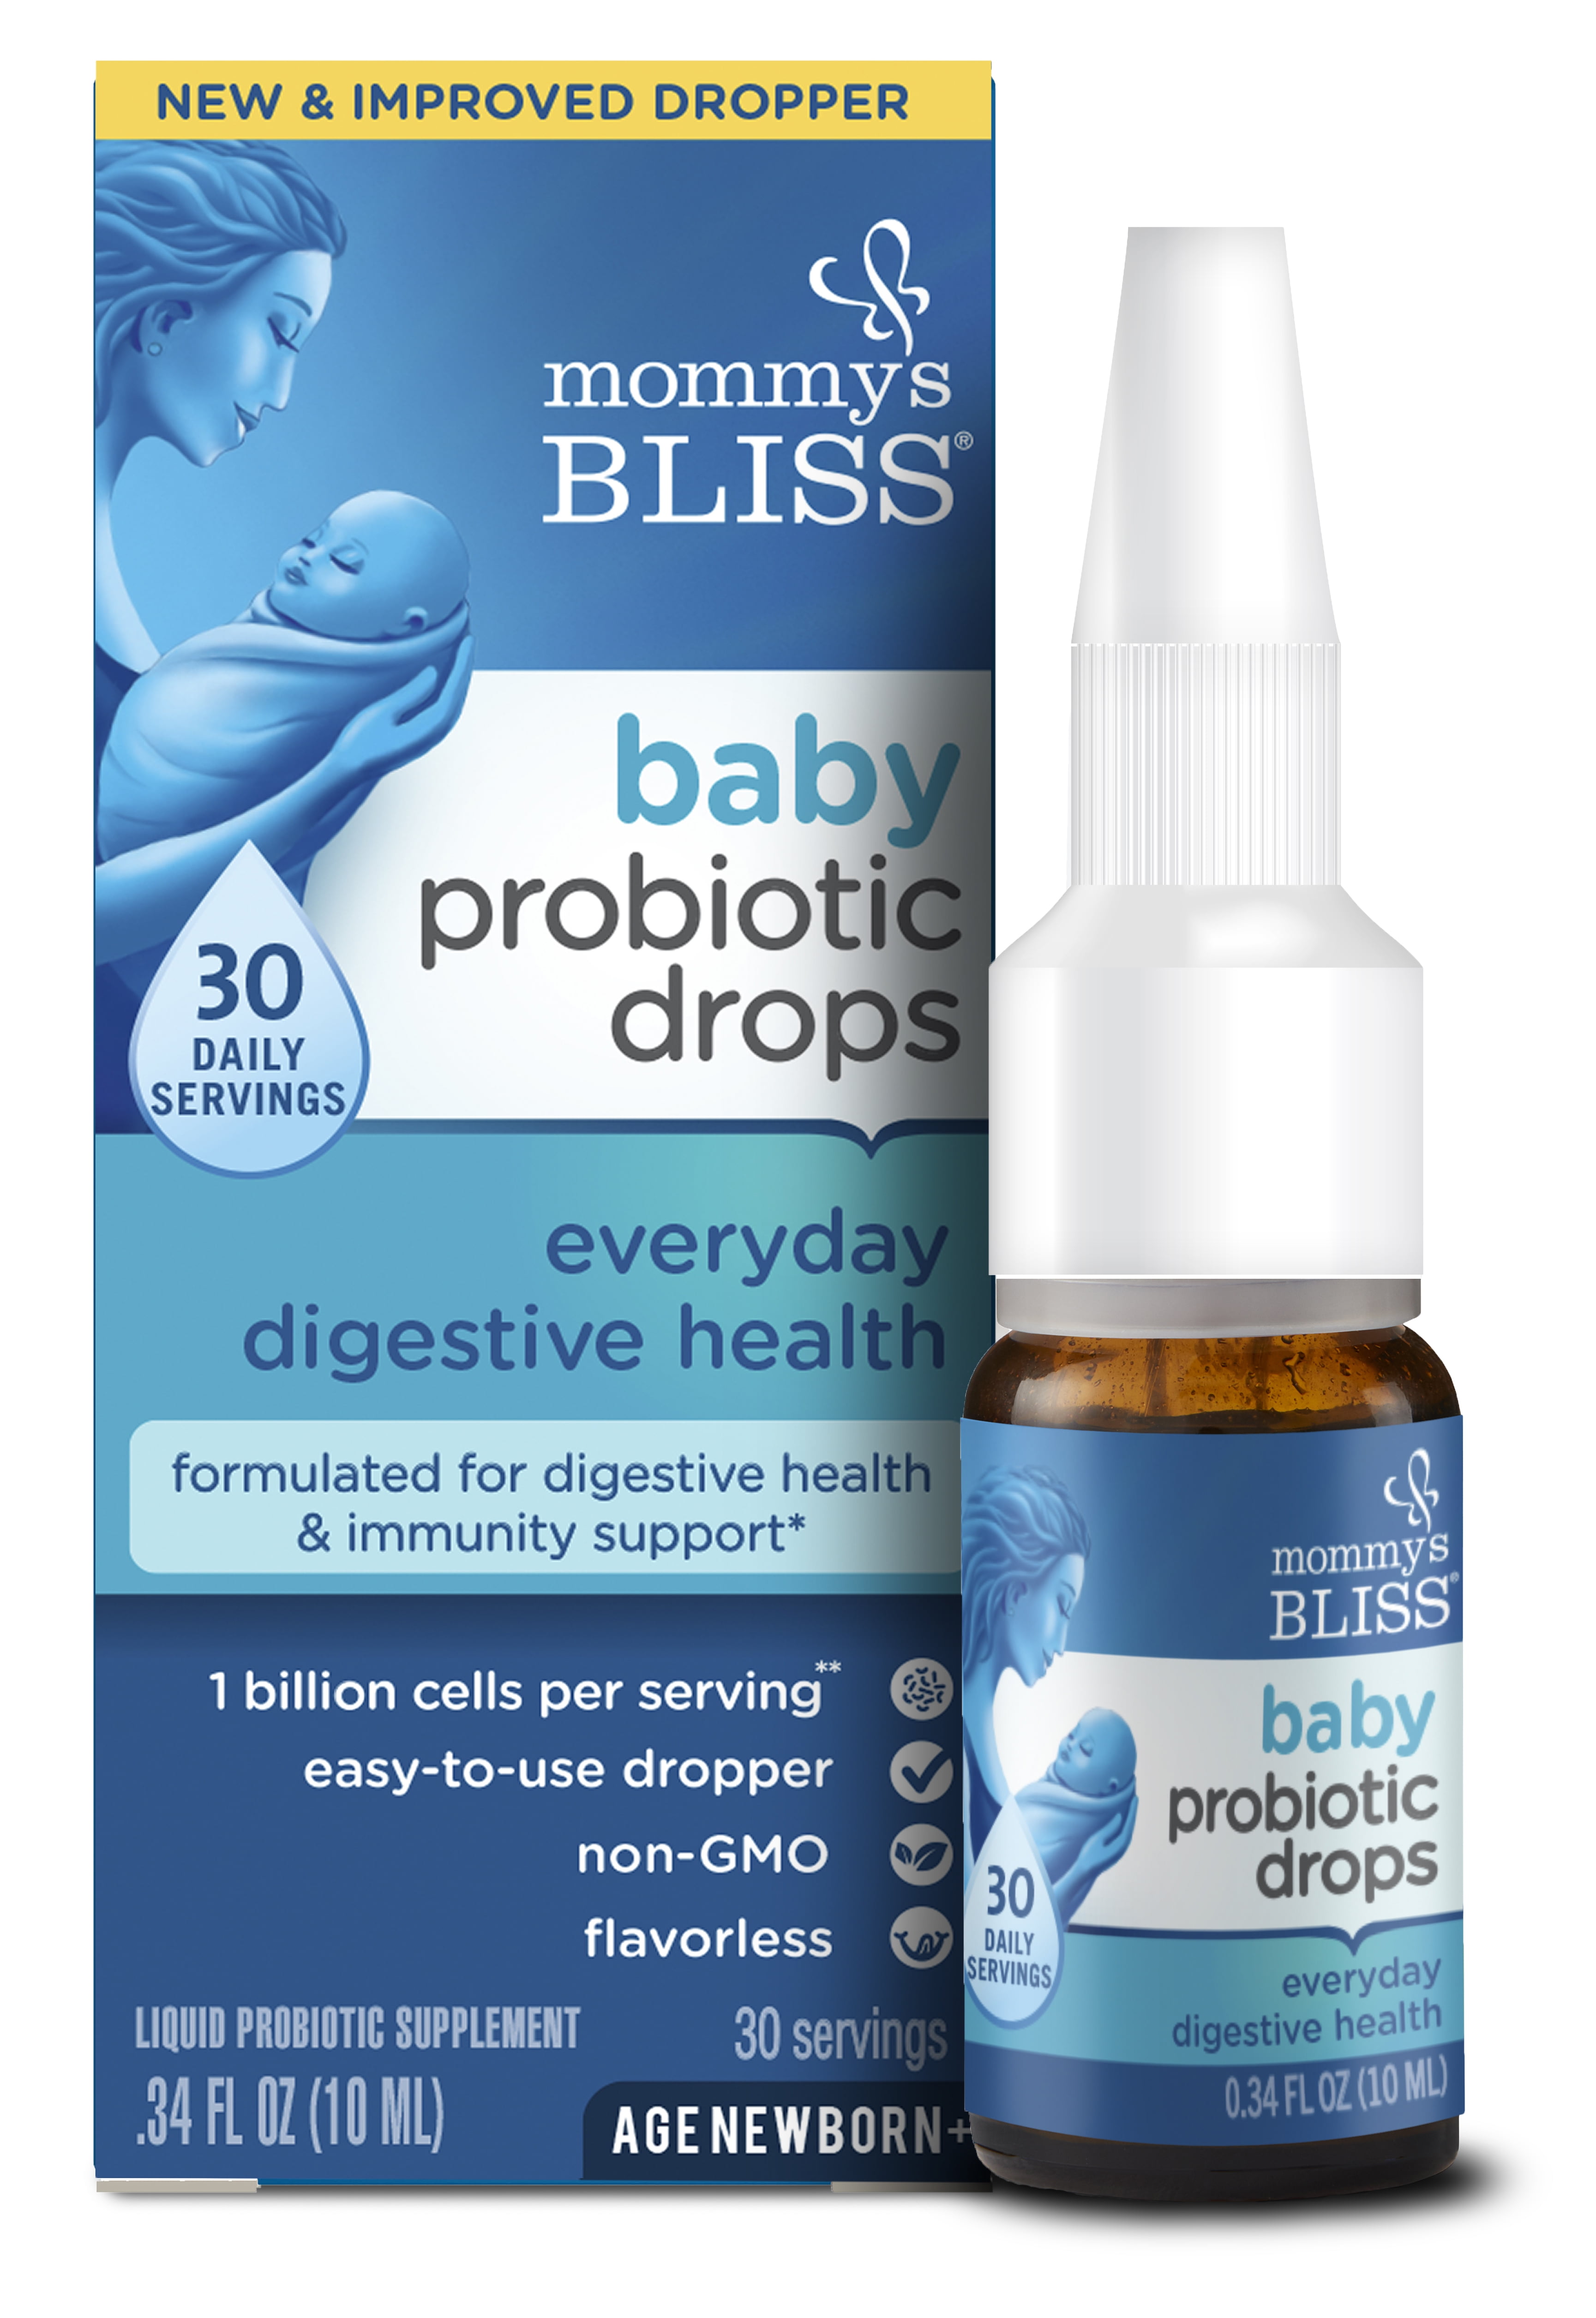 GRIPE WATER (Night Time) 4oz by Mommy's Bliss - BIOVEA USA